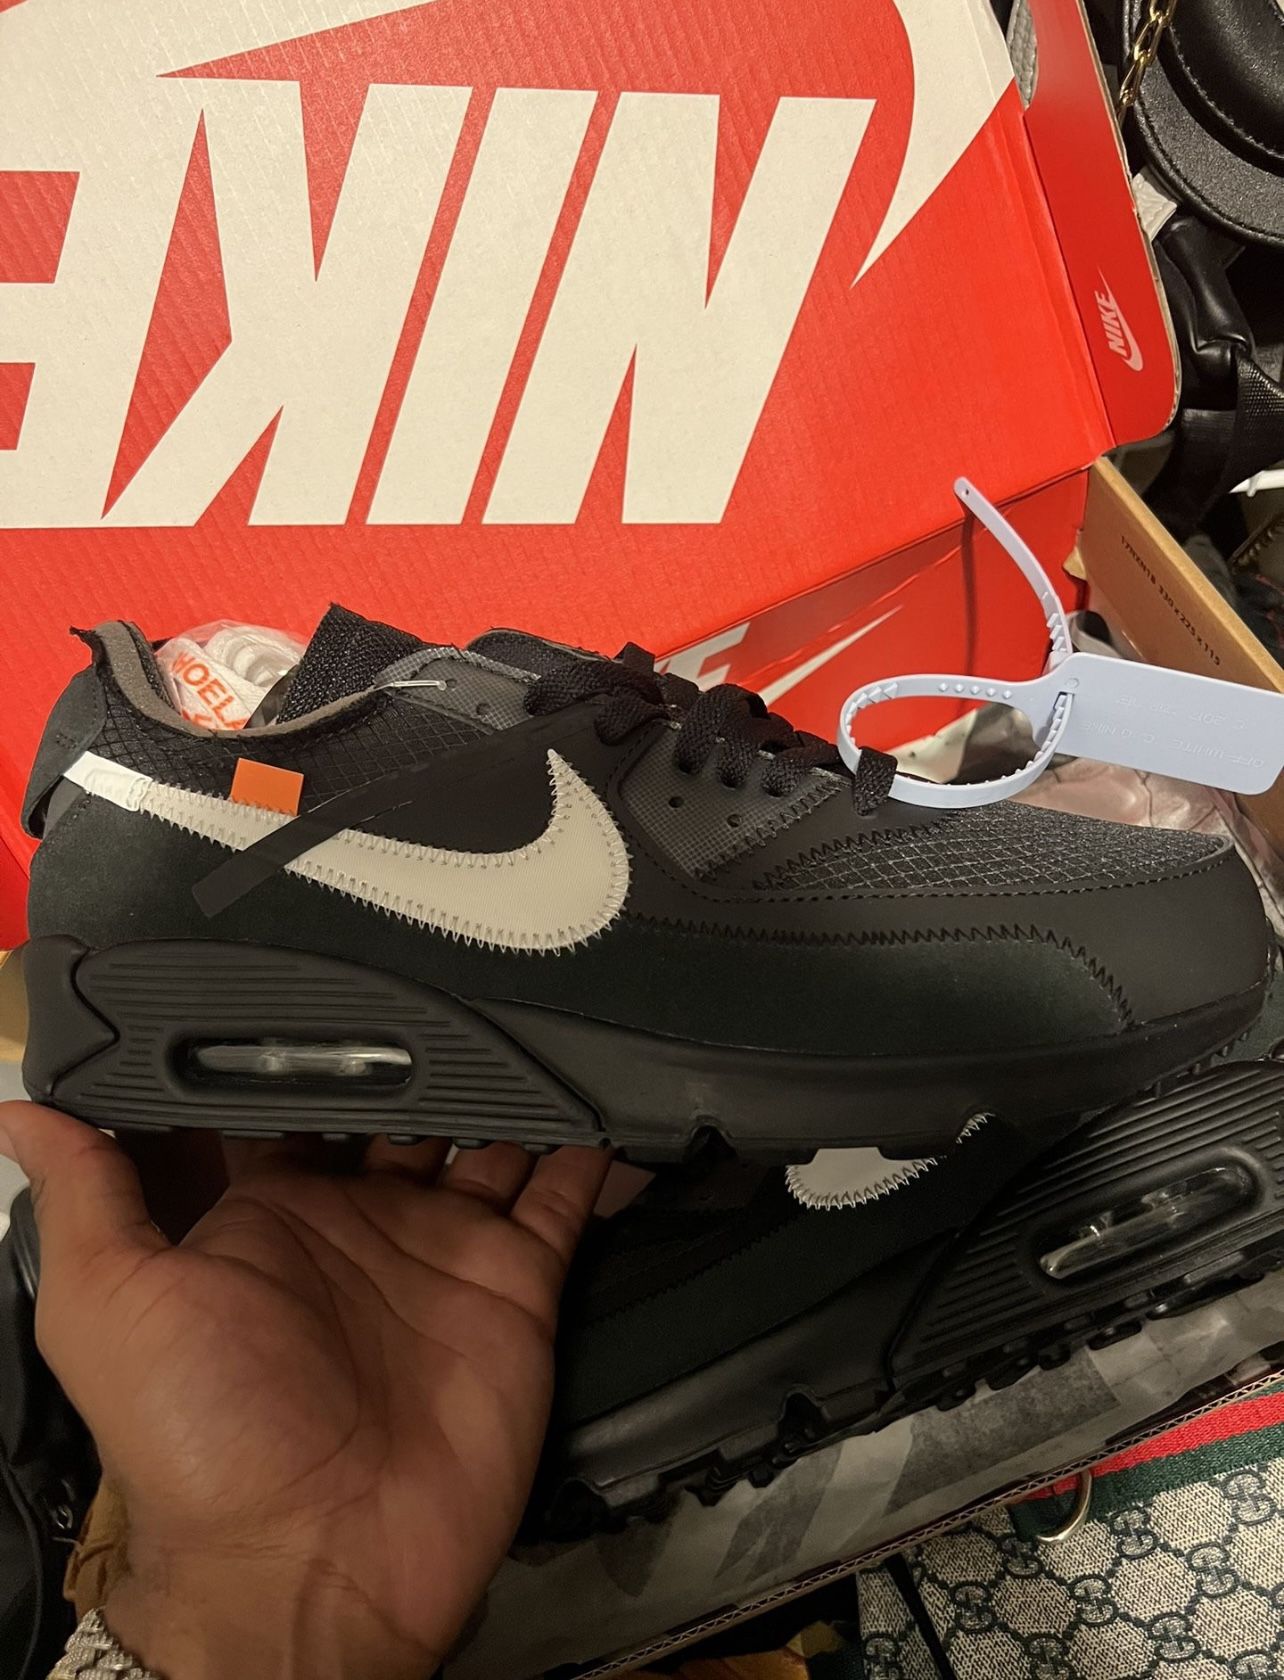 Nike x Off White Airmax 90 “Black/White” SIZE 10.5M FOR SELL NOW! 🚨🚨